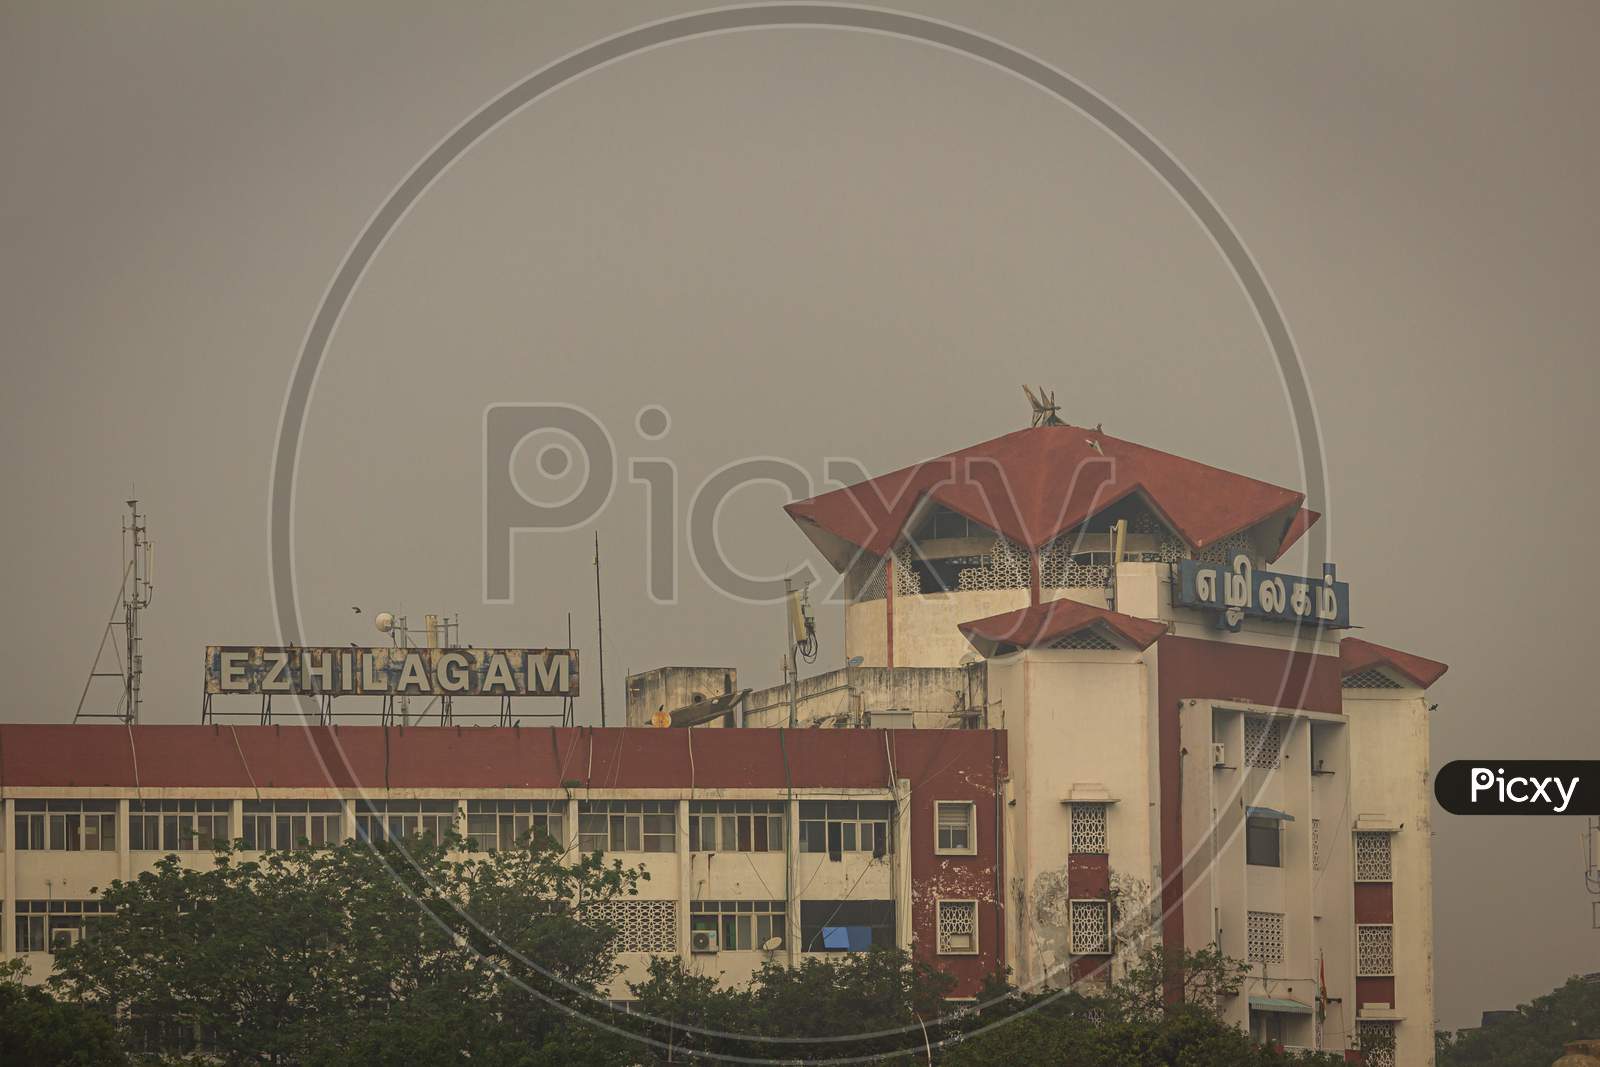 Chennai, Tamil Nadu, India - January 13 2021: View Of The Ezhilagam (In English Means Beauty Place) Building Which Houses Most Of The Tamil Nadu Government Offices Along The Marina Beach